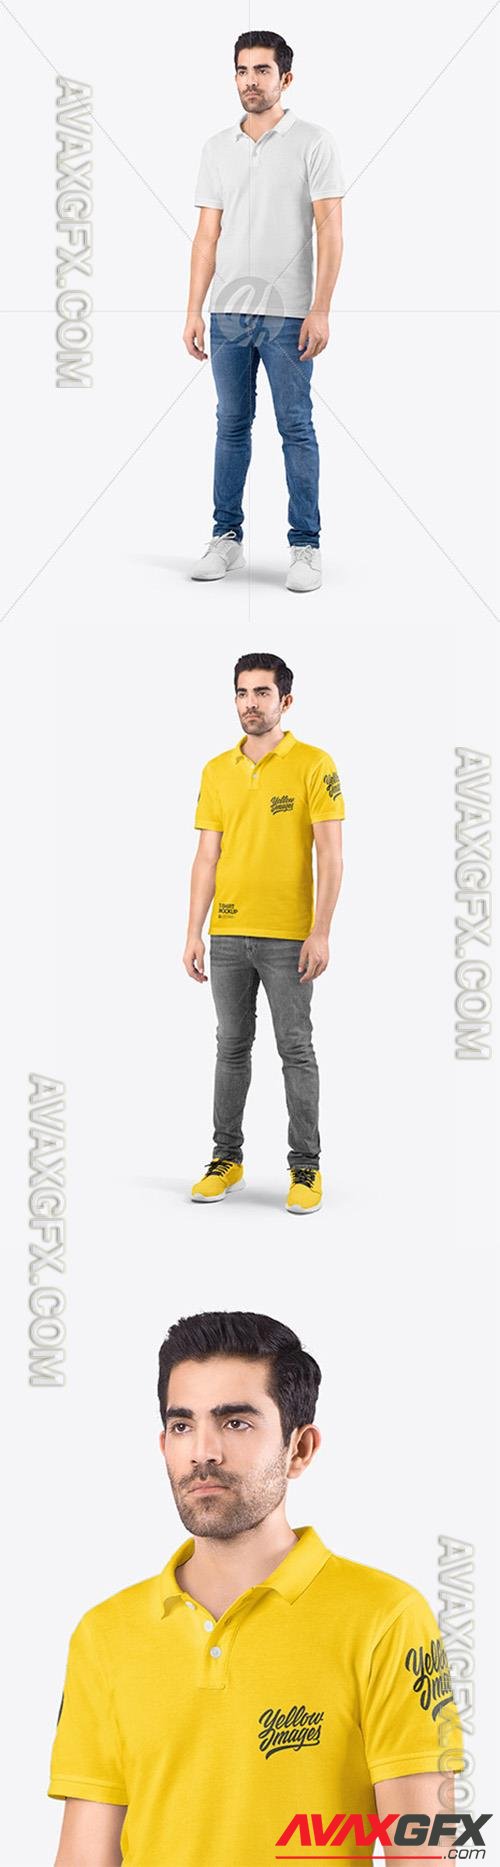 Man in T-Shirt and Jeans Mockup 73736